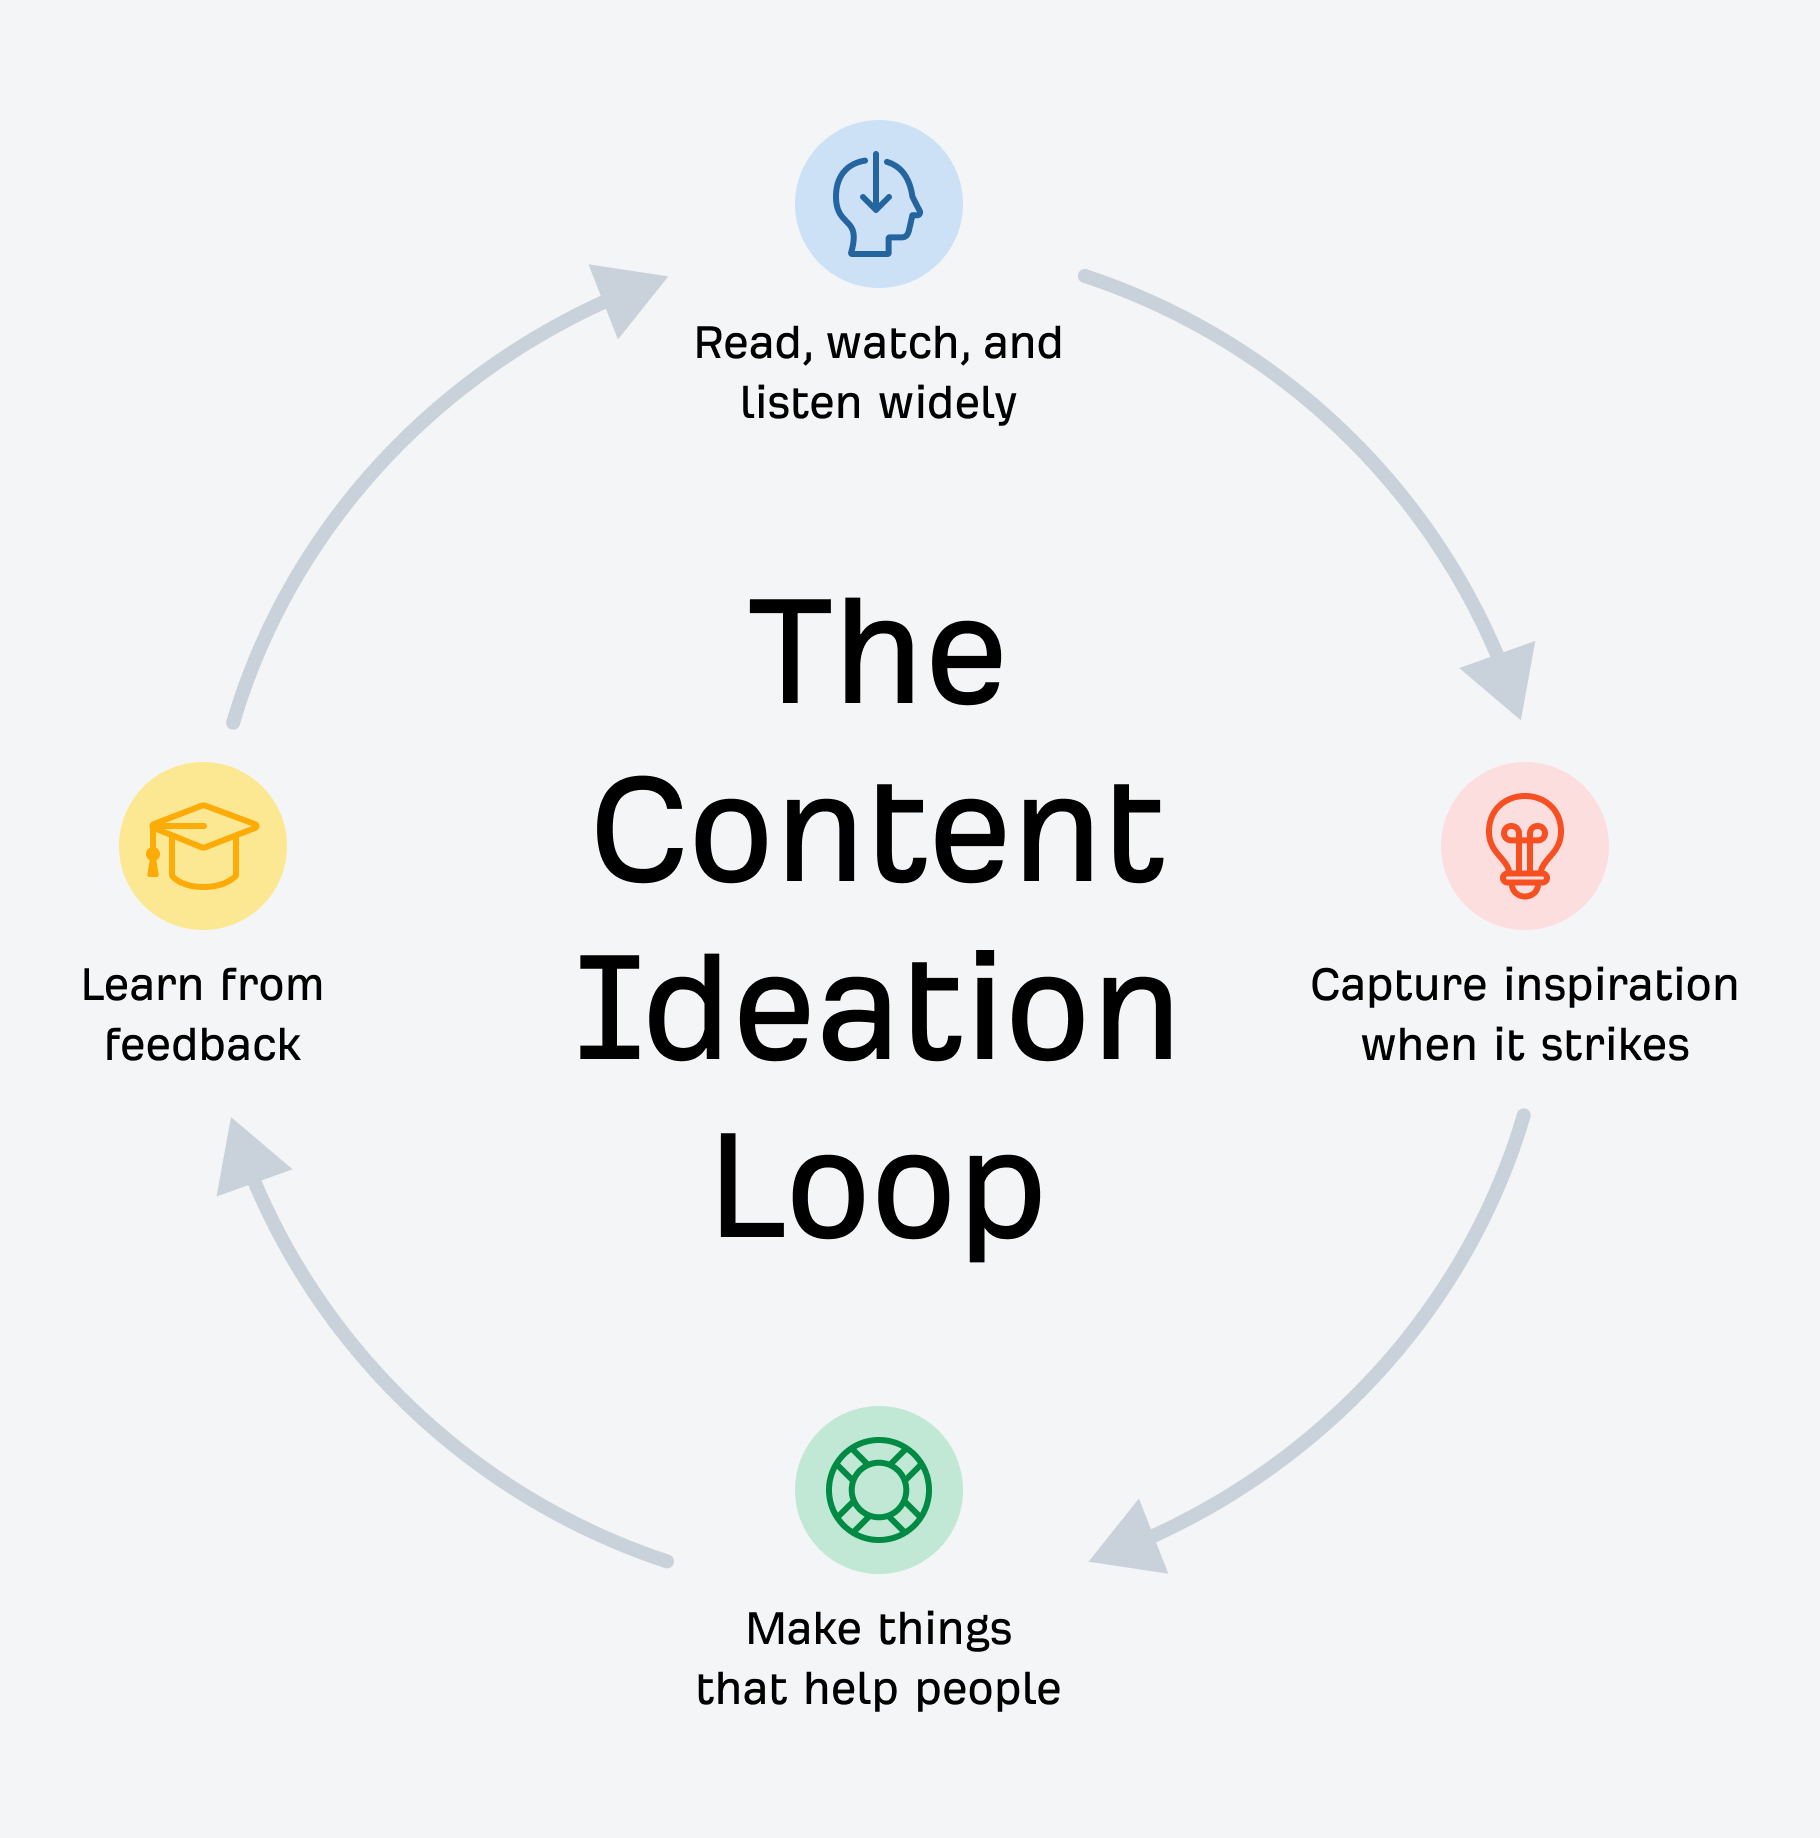 The content ideation loop